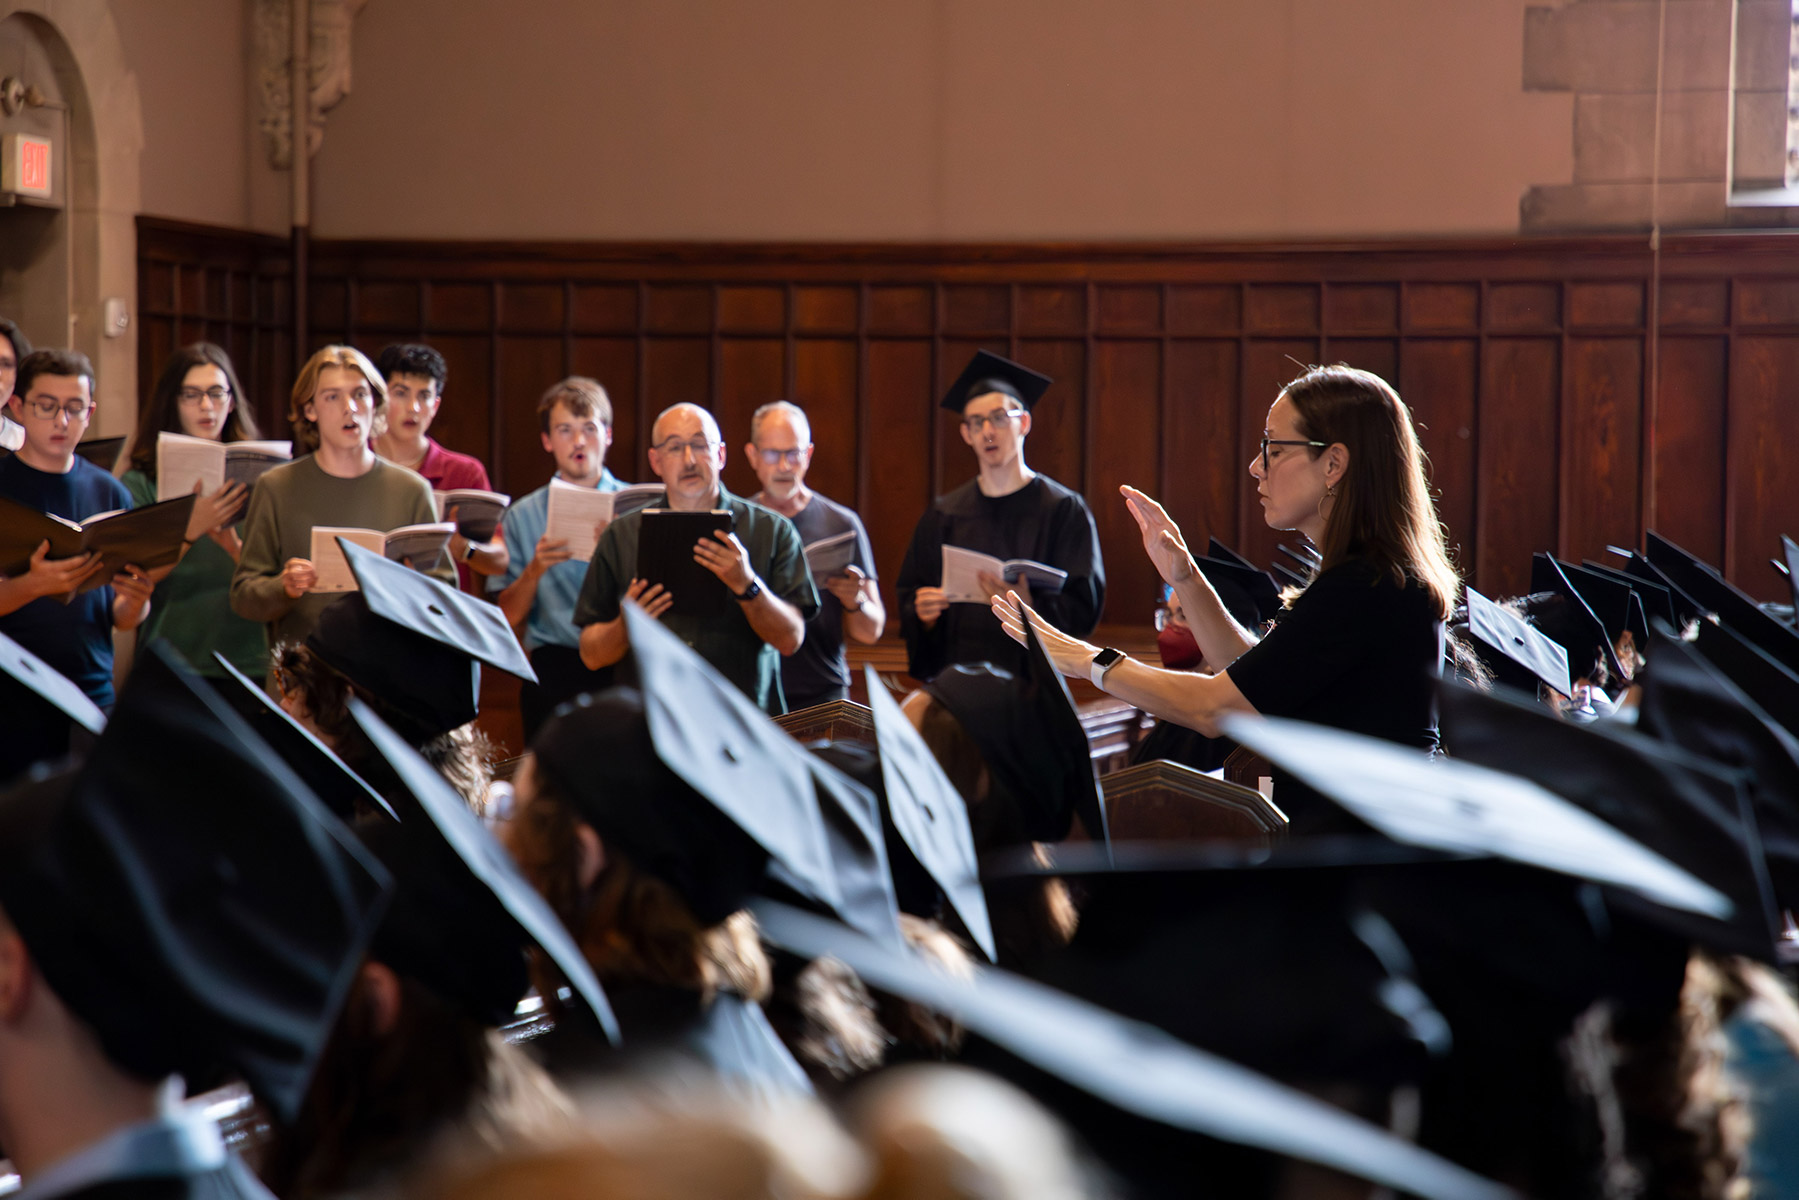 Conductor standing gesturing with singers in the background and students with graduation caps in the foreground.